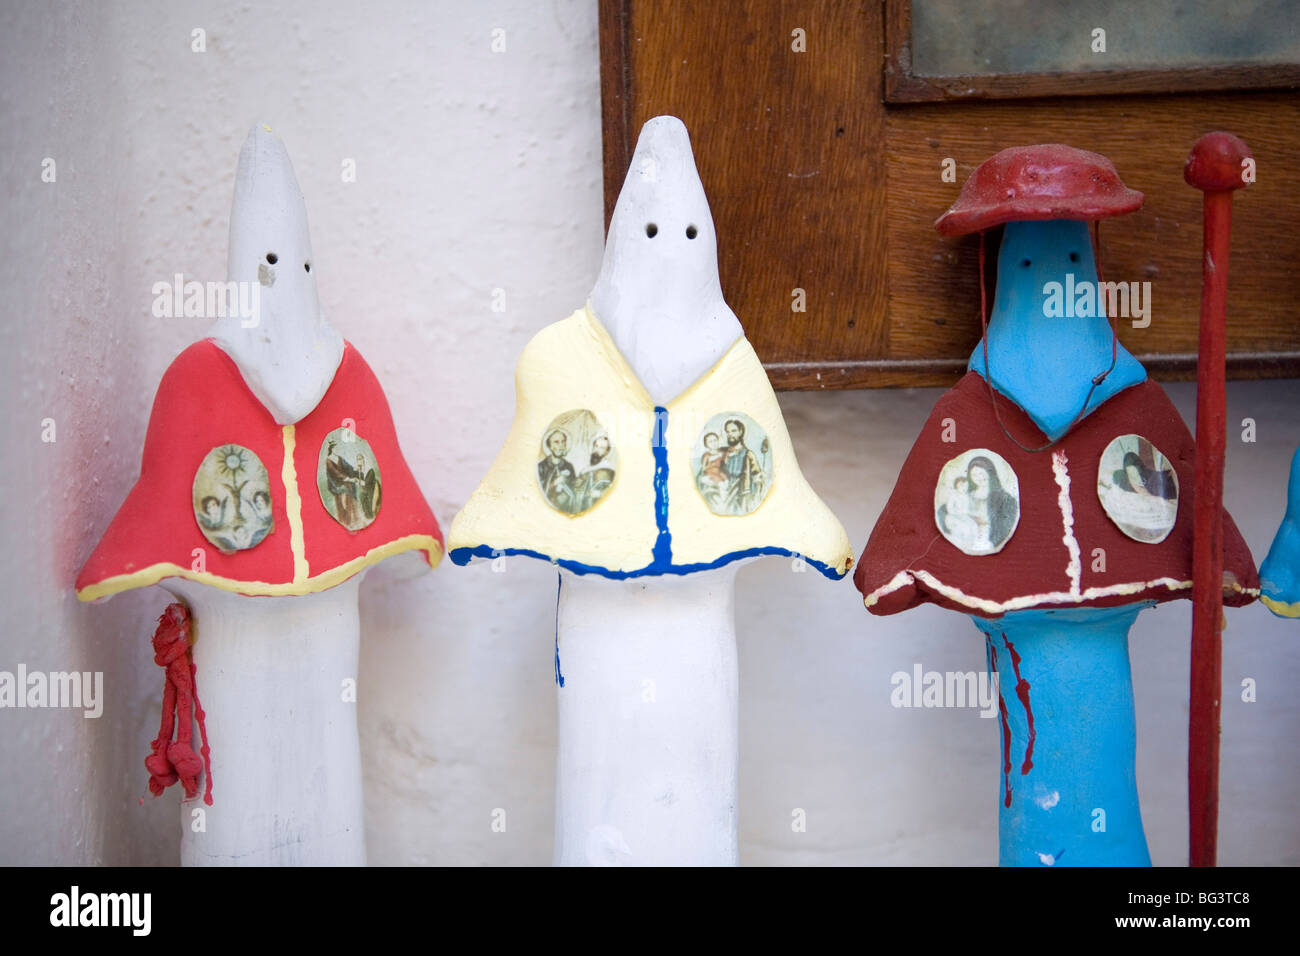 Different brotherhood masks during Holy Week, Old Town, Gallipoli, Lecce province, Puglia, Italy, Europe Stock Photo